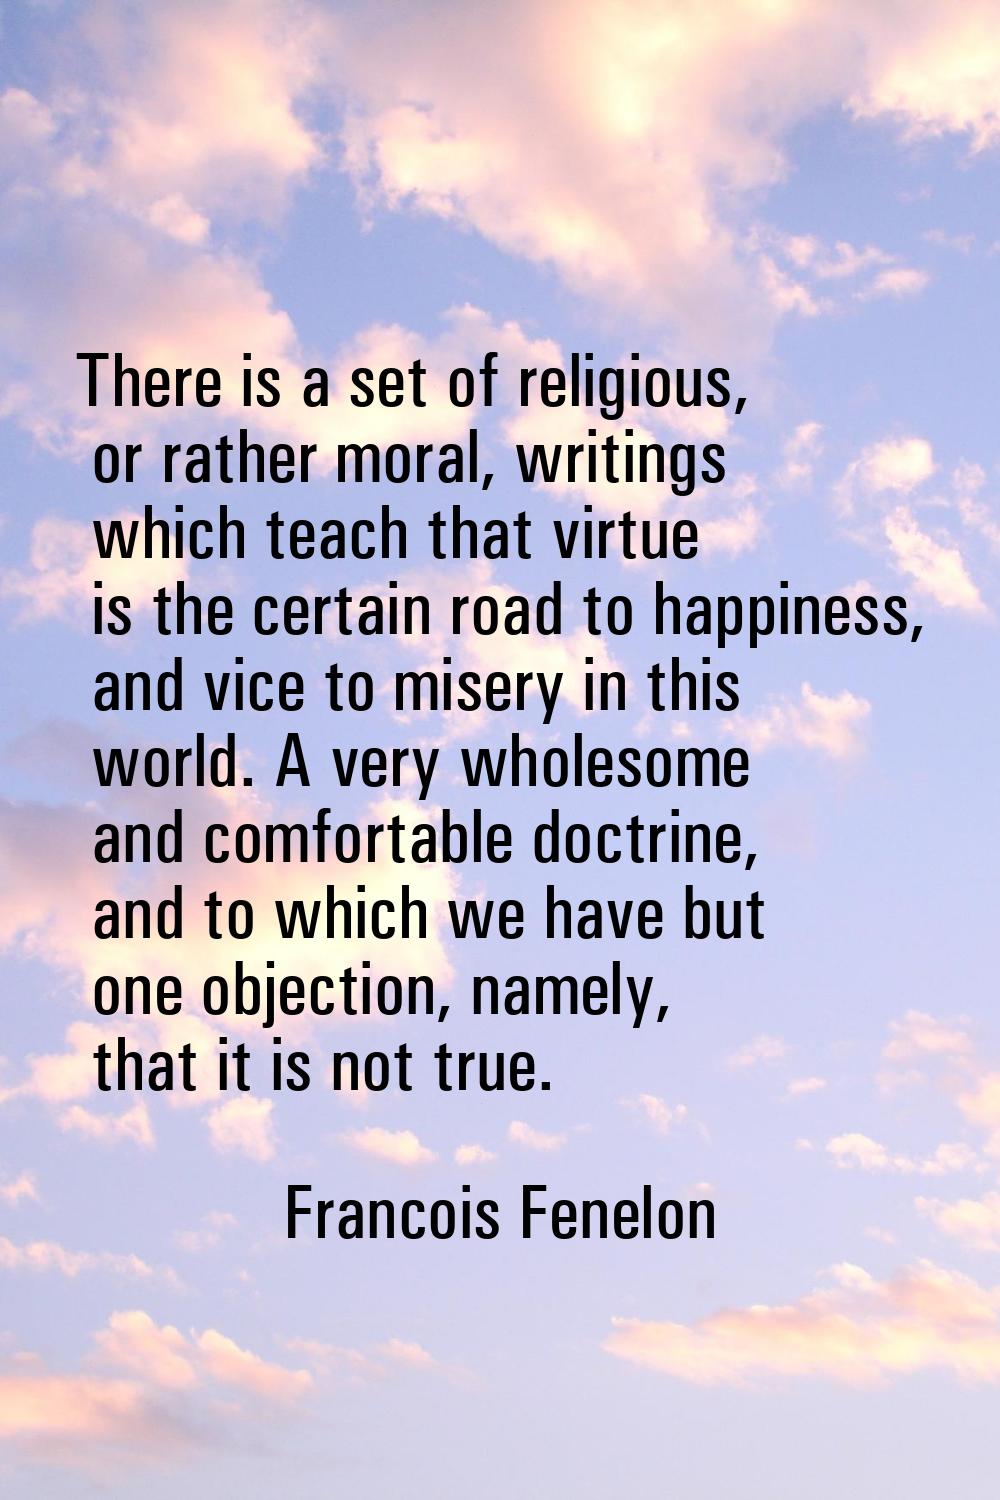 There is a set of religious, or rather moral, writings which teach that virtue is the certain road 